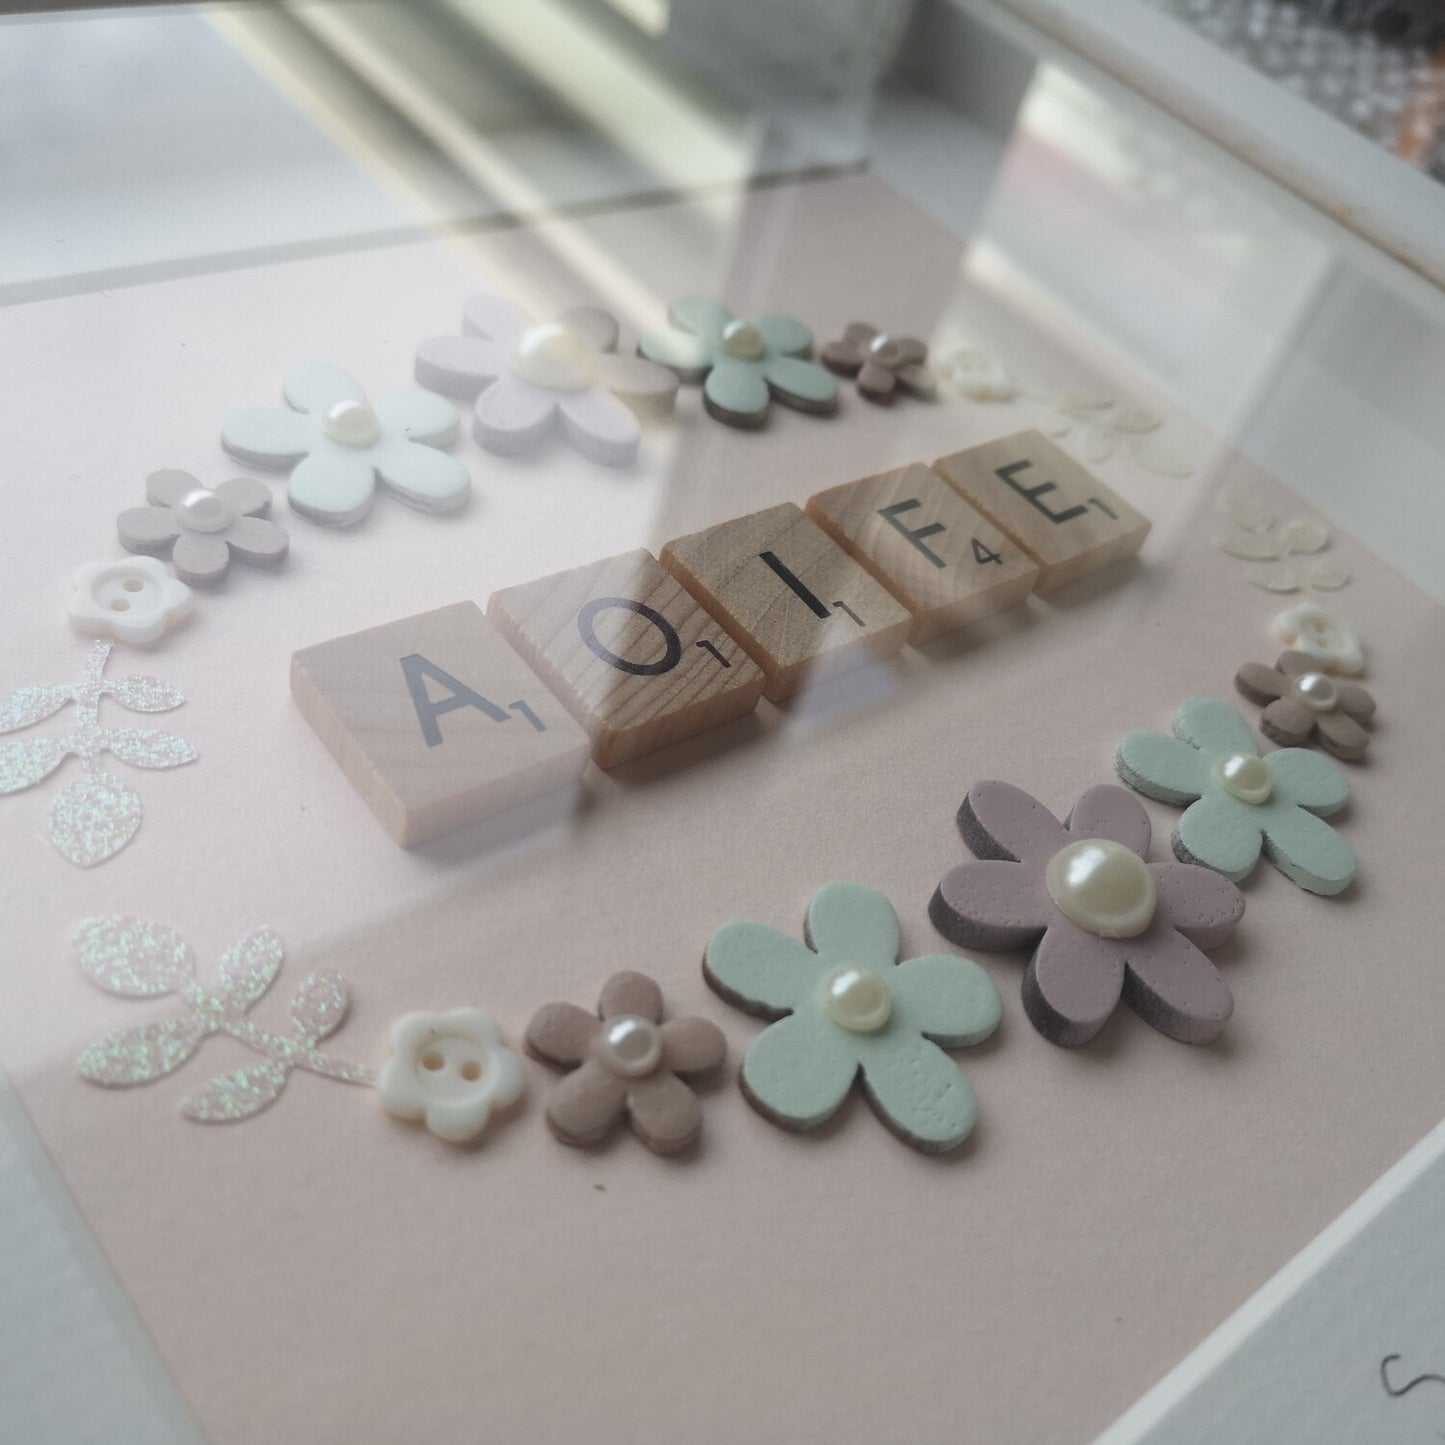 A close up of a pretty pastel wreath frame with a name in the middle in wooden letter tiles. The wreath is made with wooden flowers, pearls resin buttons and sparkly card leaves, in a handmade 25x25cm deep box wooden frame.